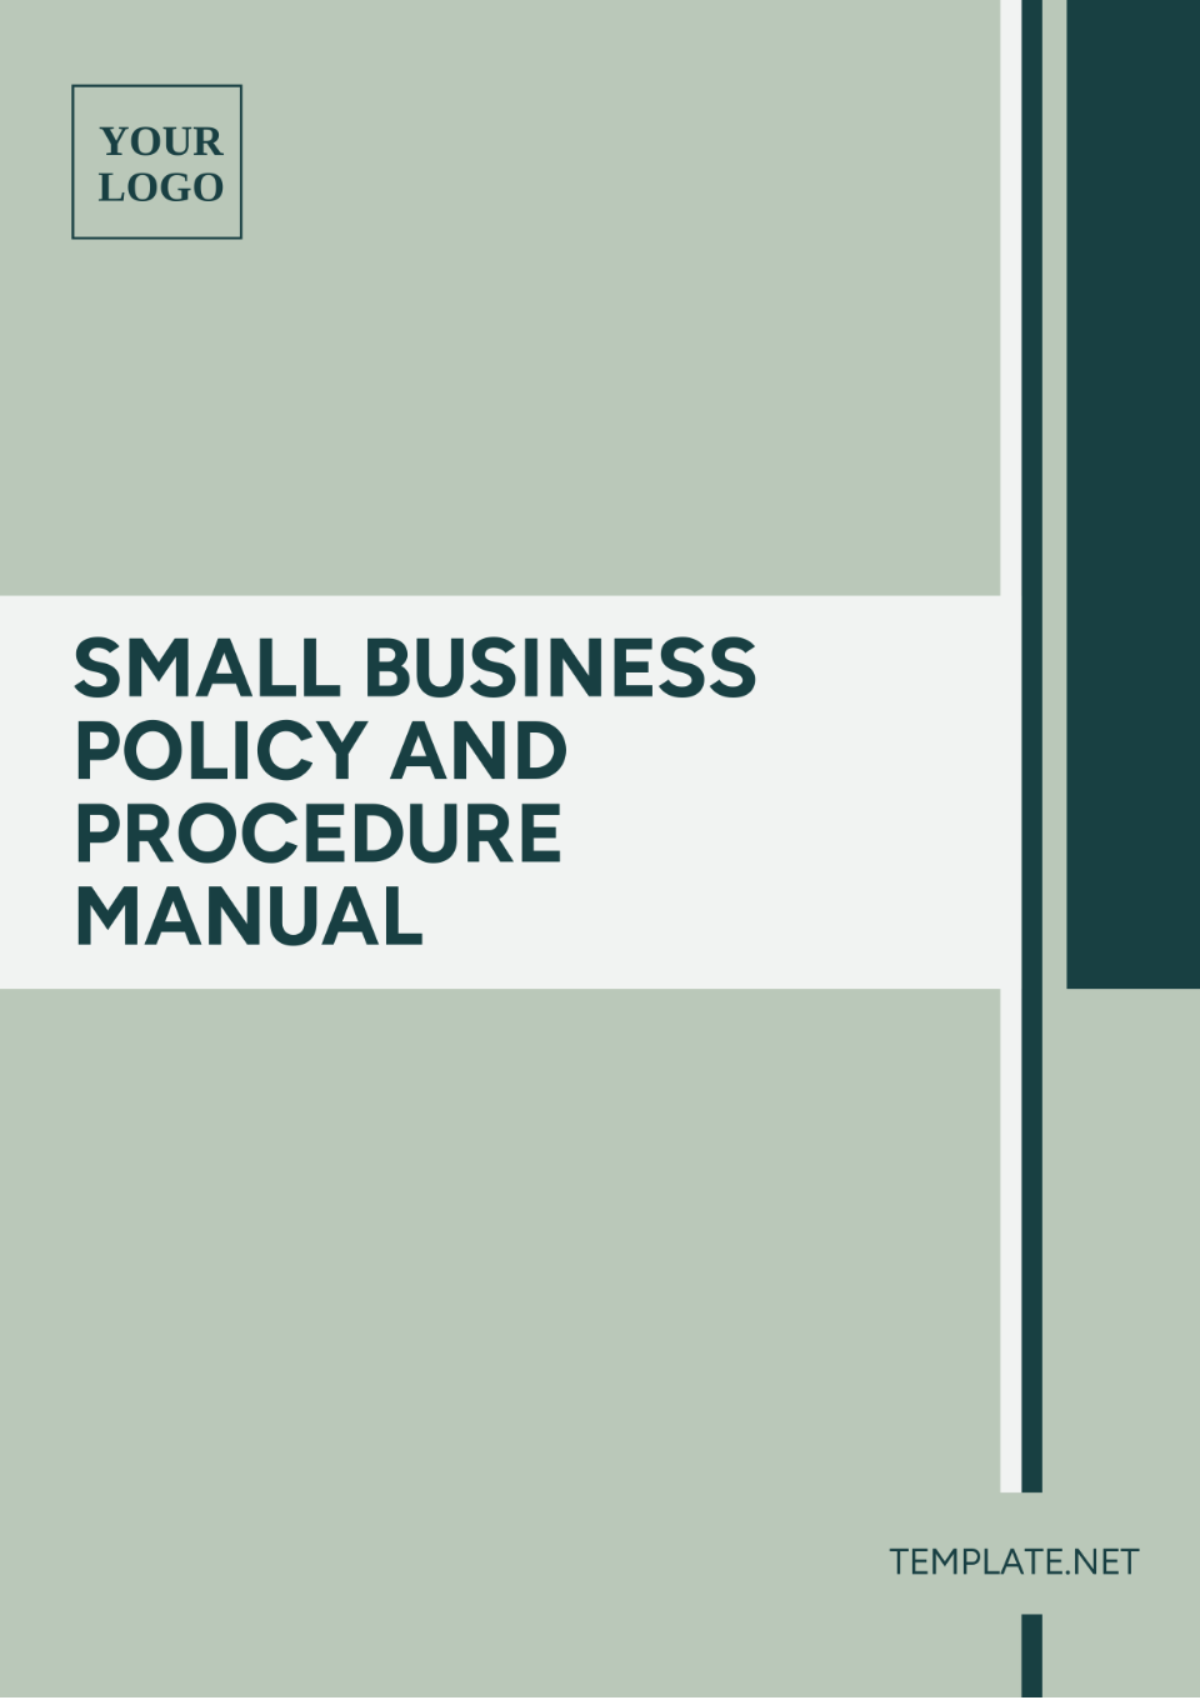 Small Business Policy and Procedure Manual Template